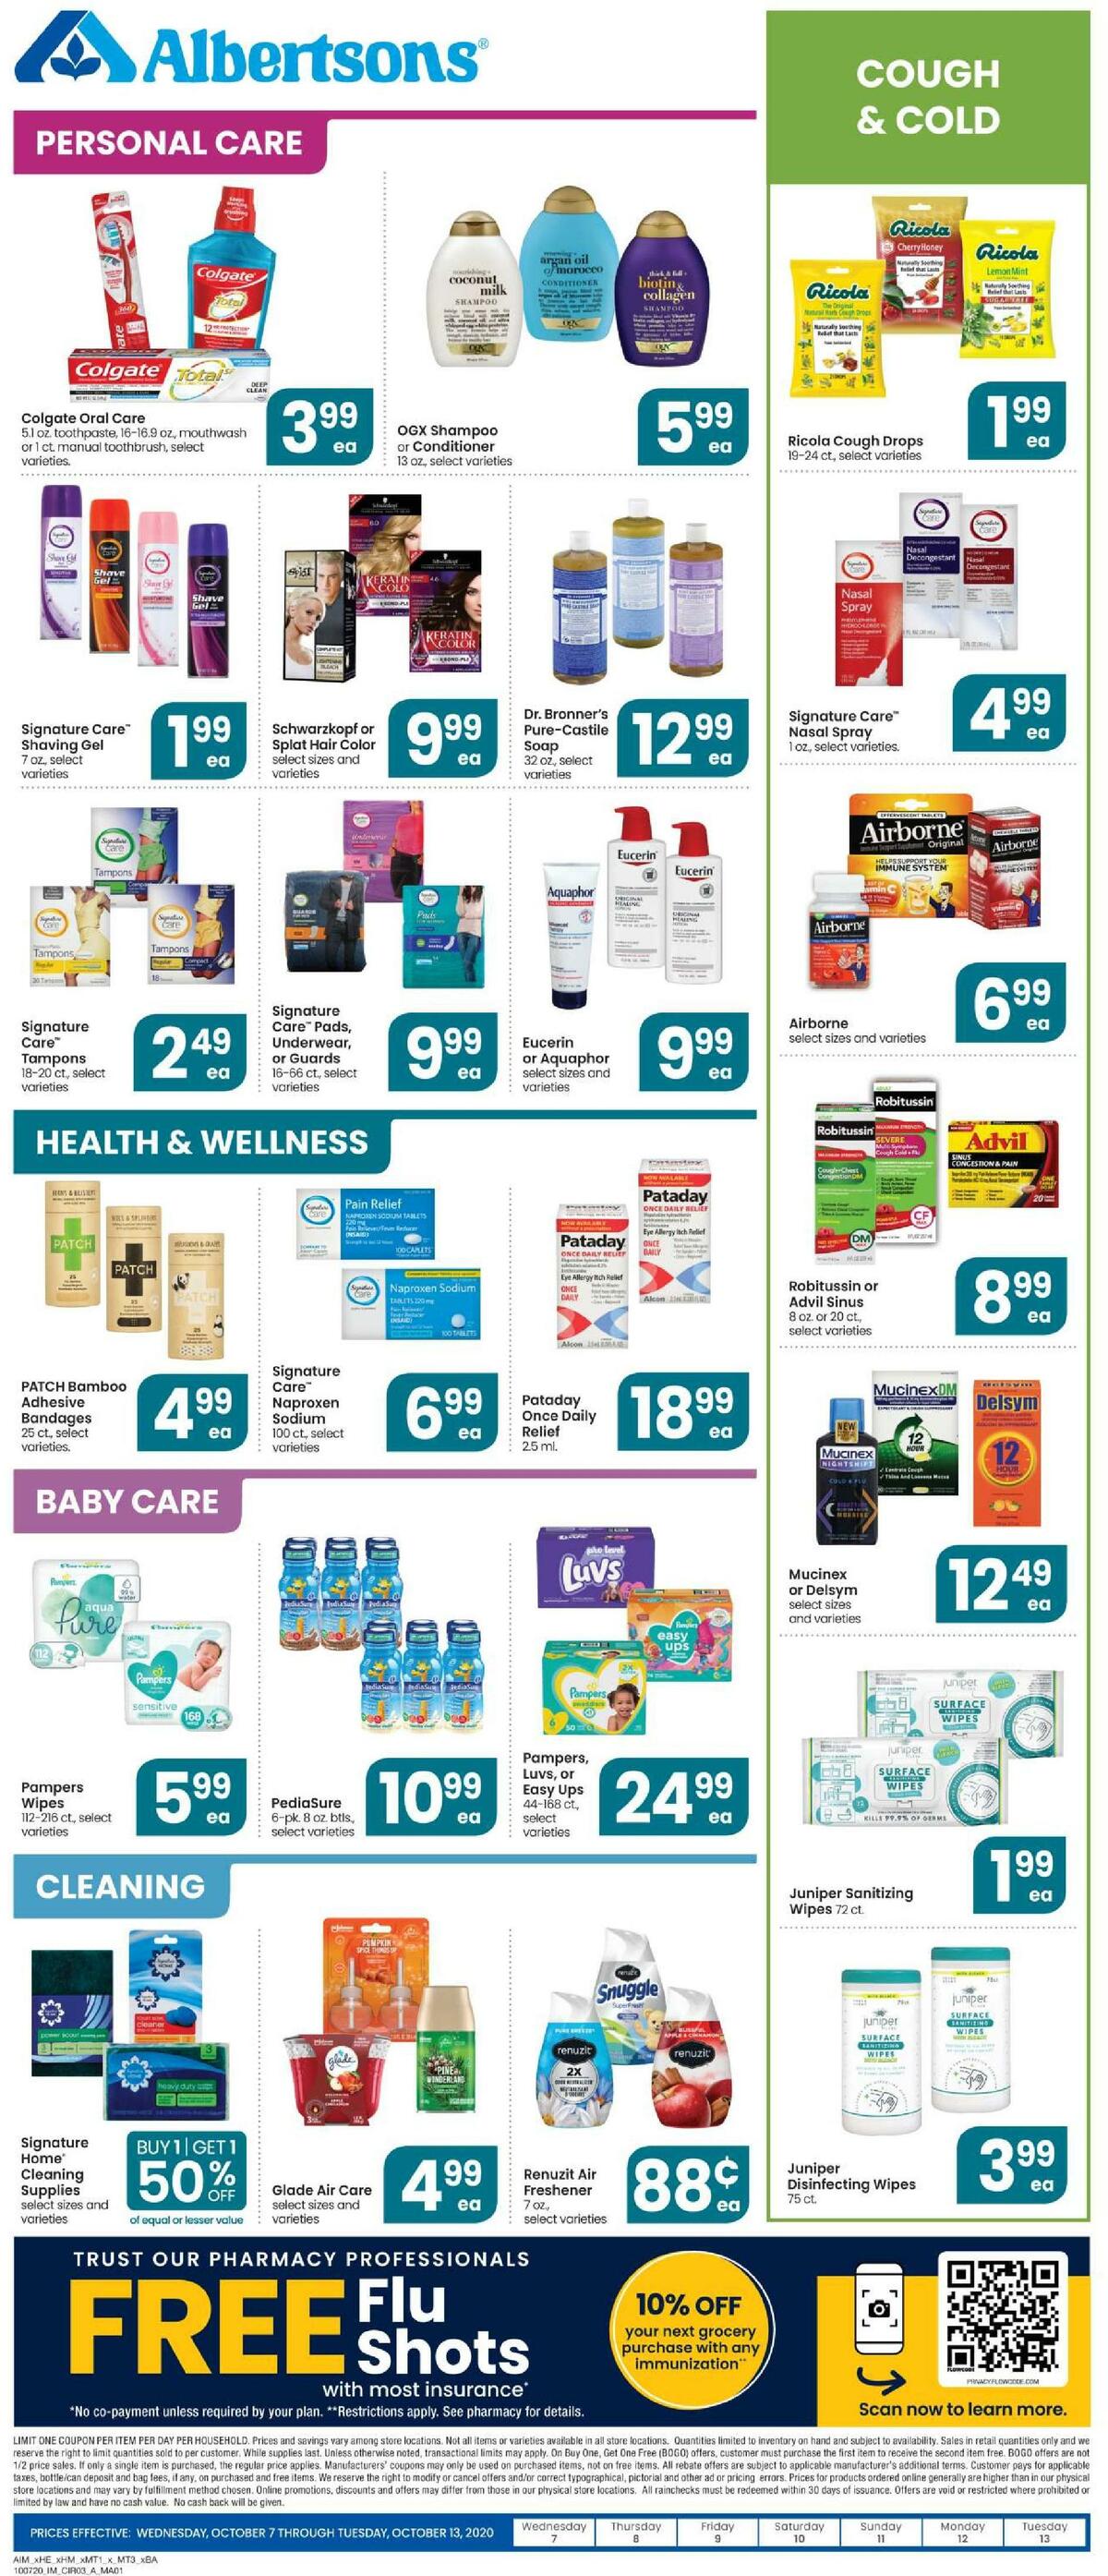 Albertsons Weekly Ad from October 7